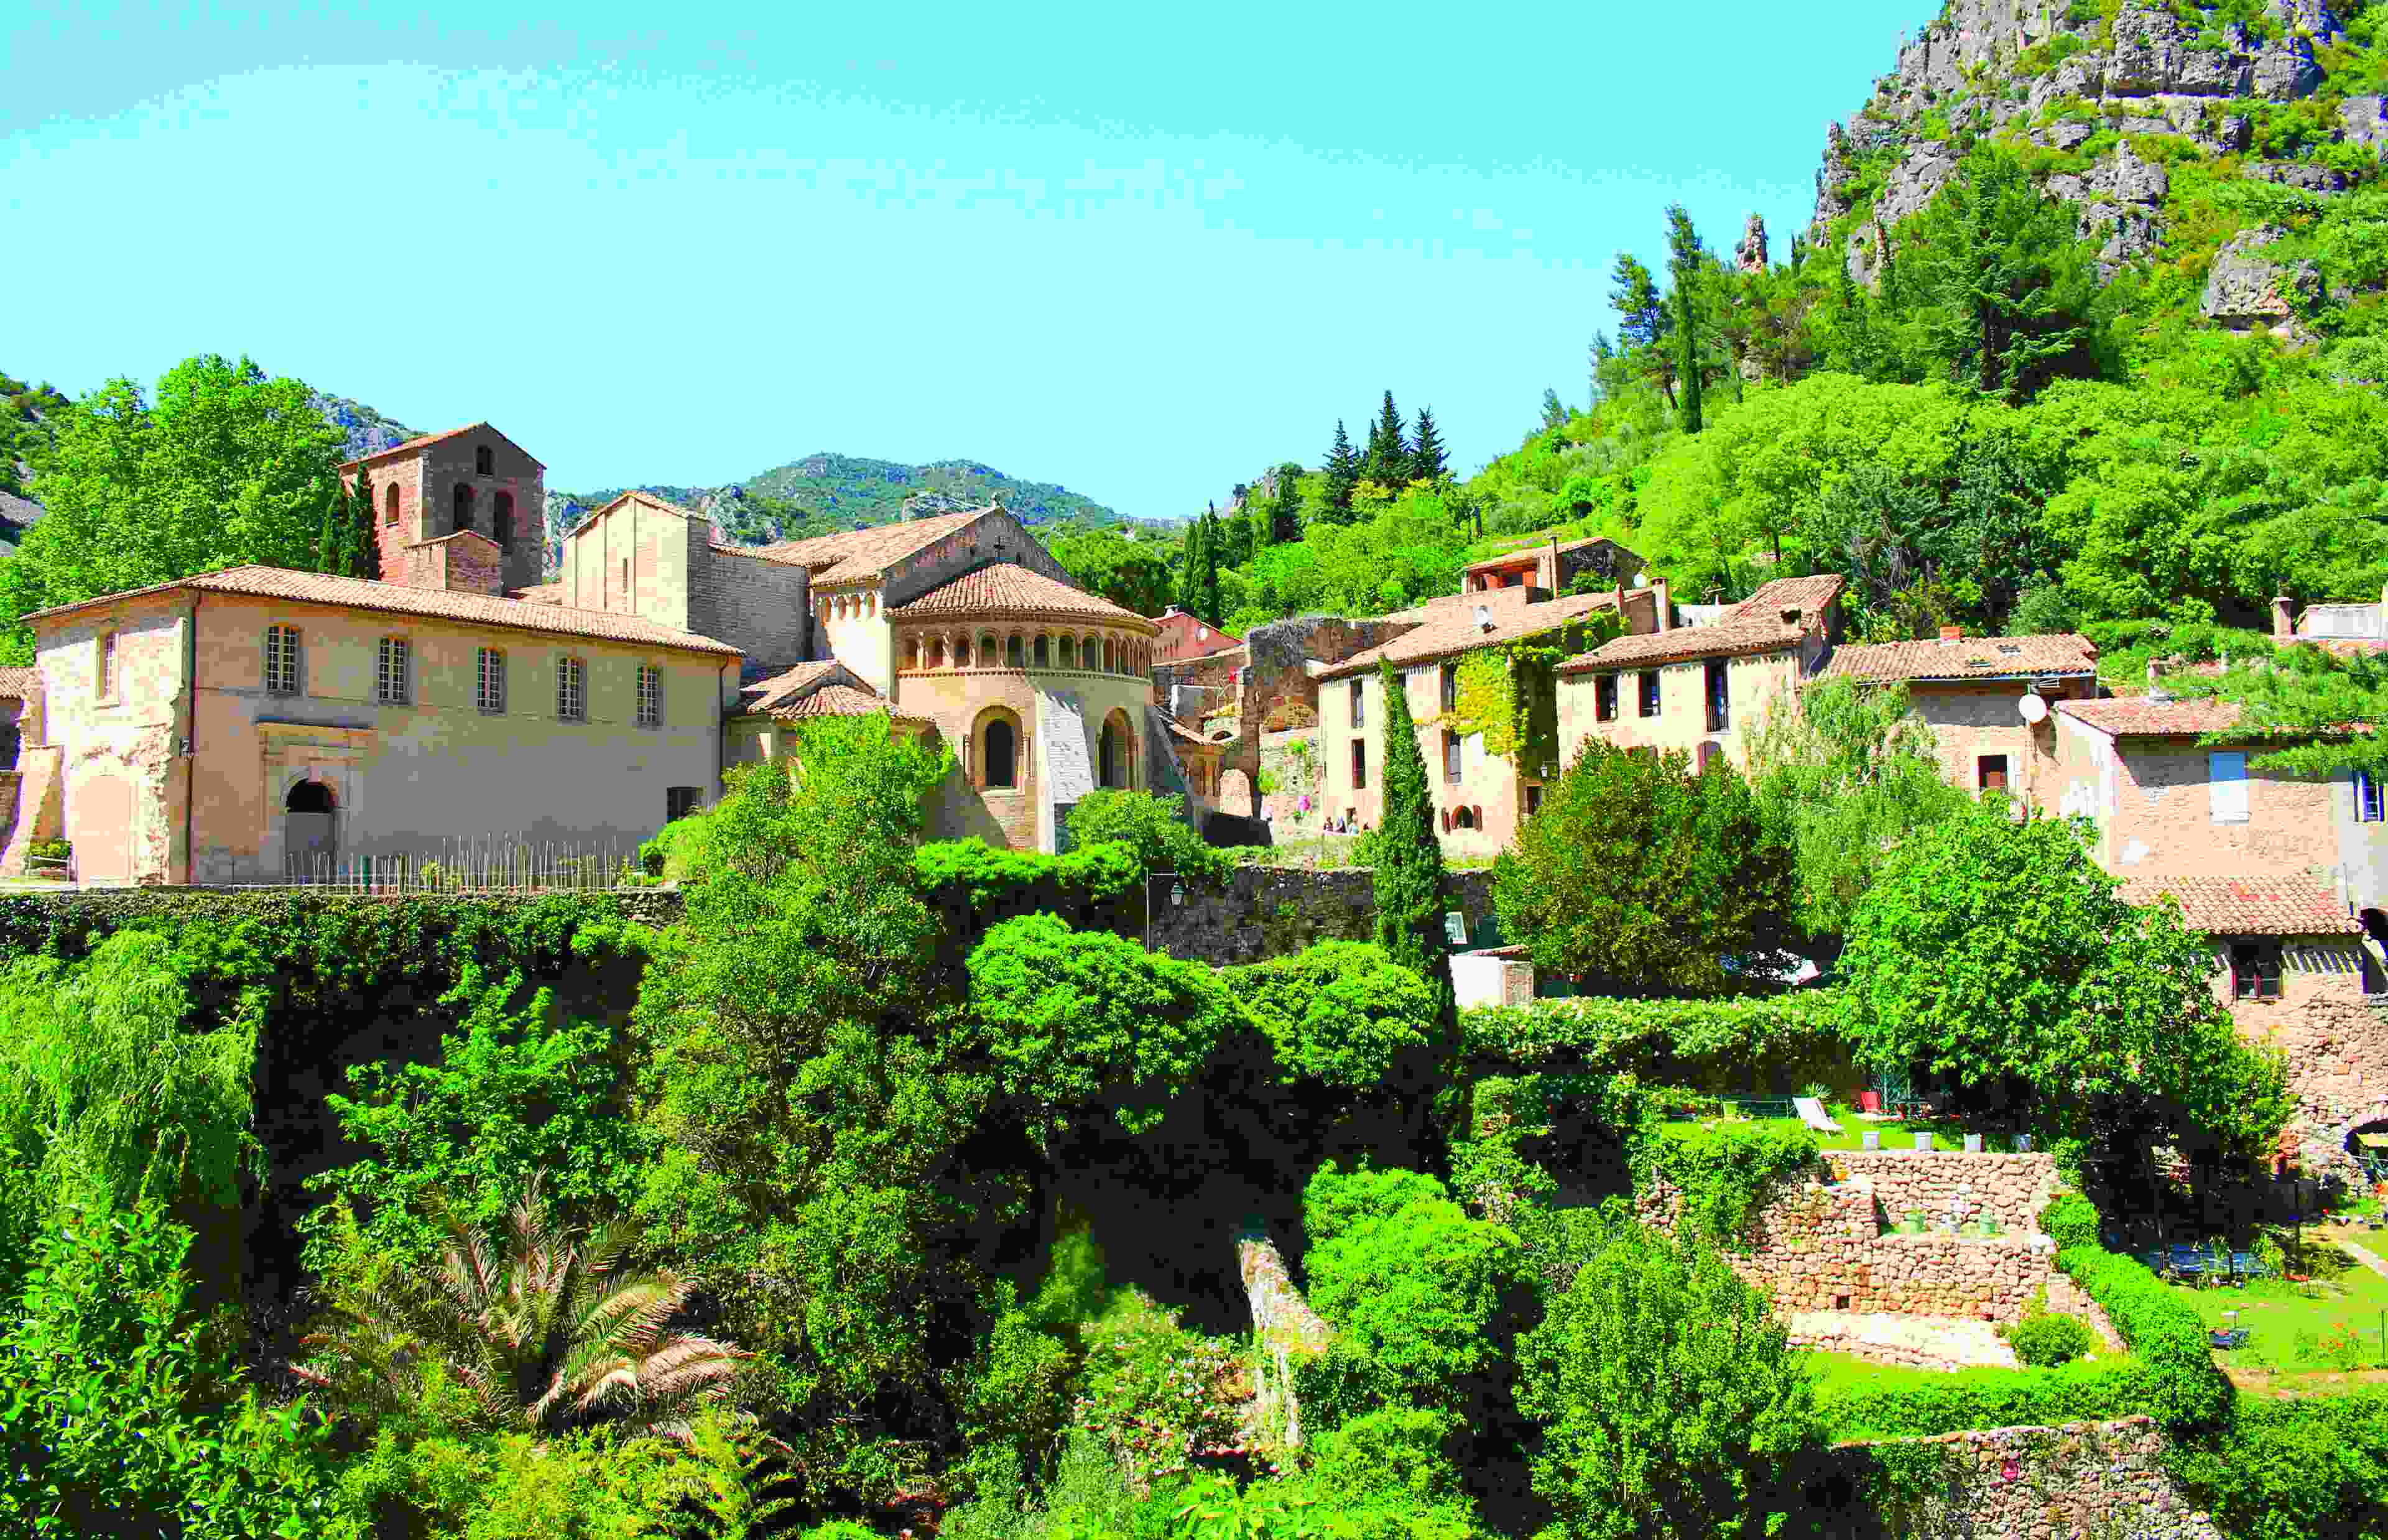 Saint-Guilhem-le-Desert one of the most beautiful towns in France (Image: PictureFlex/Courtesy of CroisiEurope)